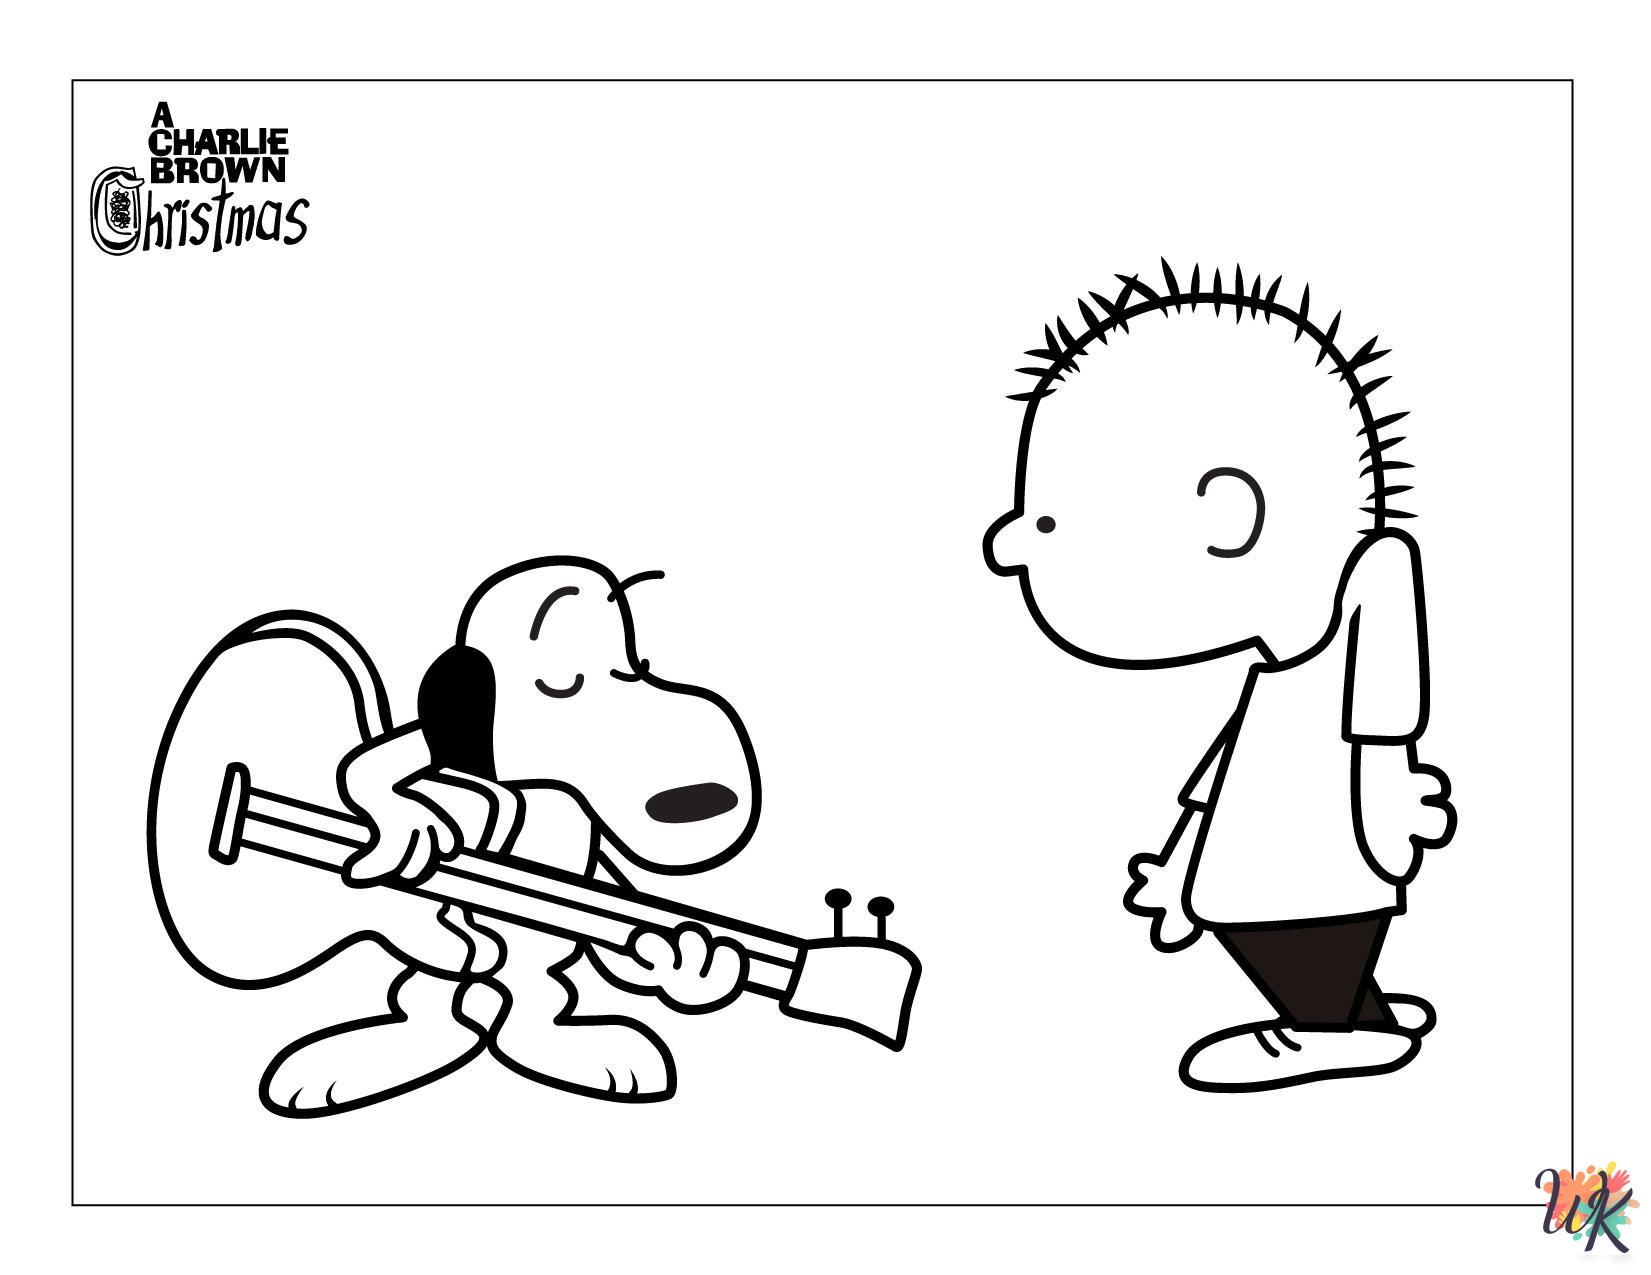 Peanuts themed coloring pages